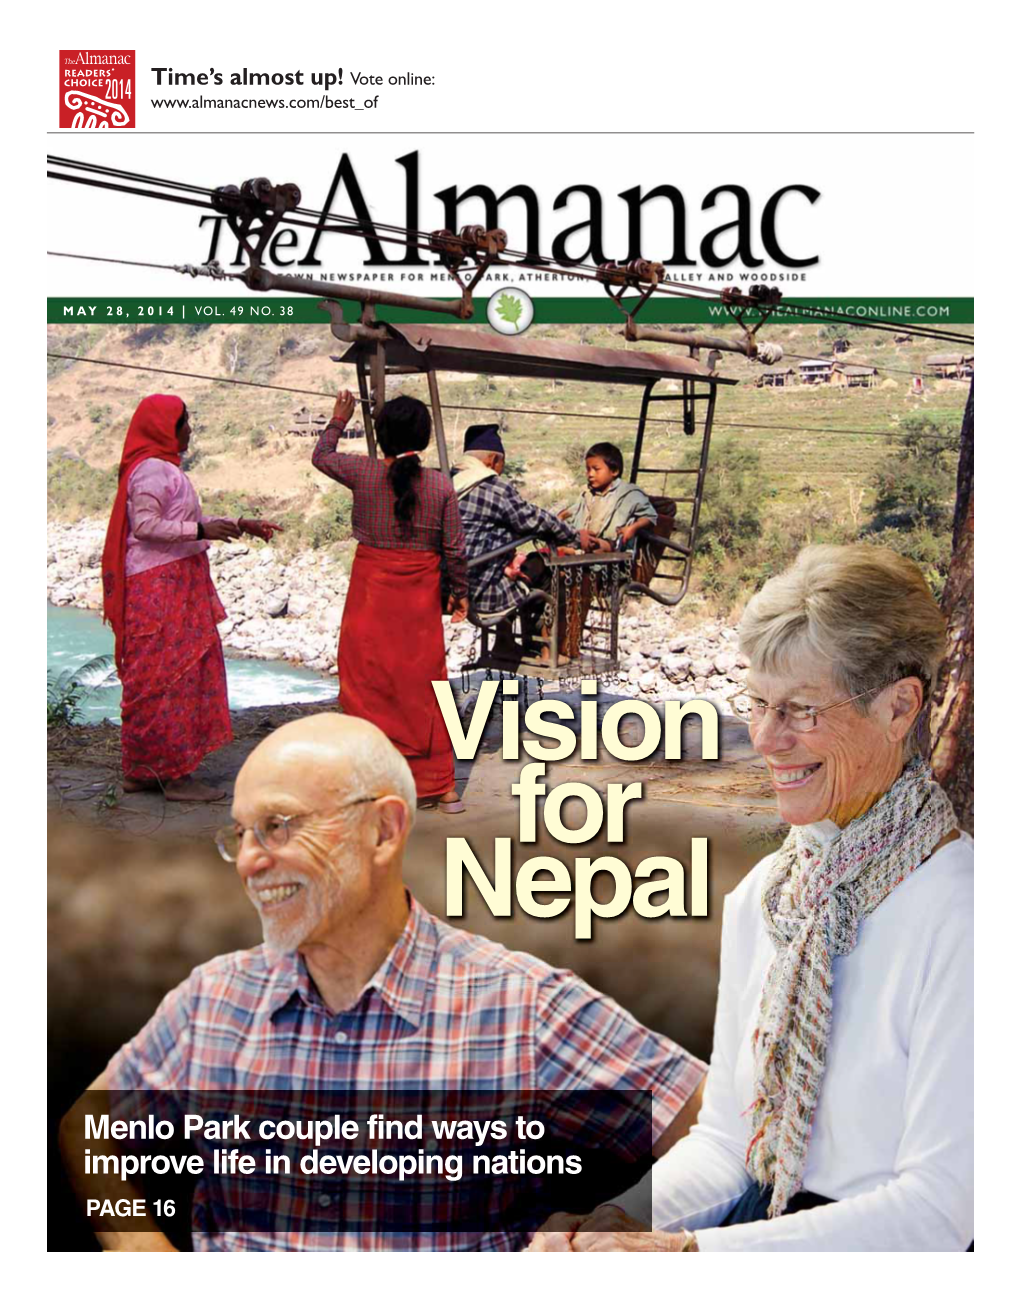 Menlo Park Couple Find Ways to Improve Life in Developing Nations PAGE 16